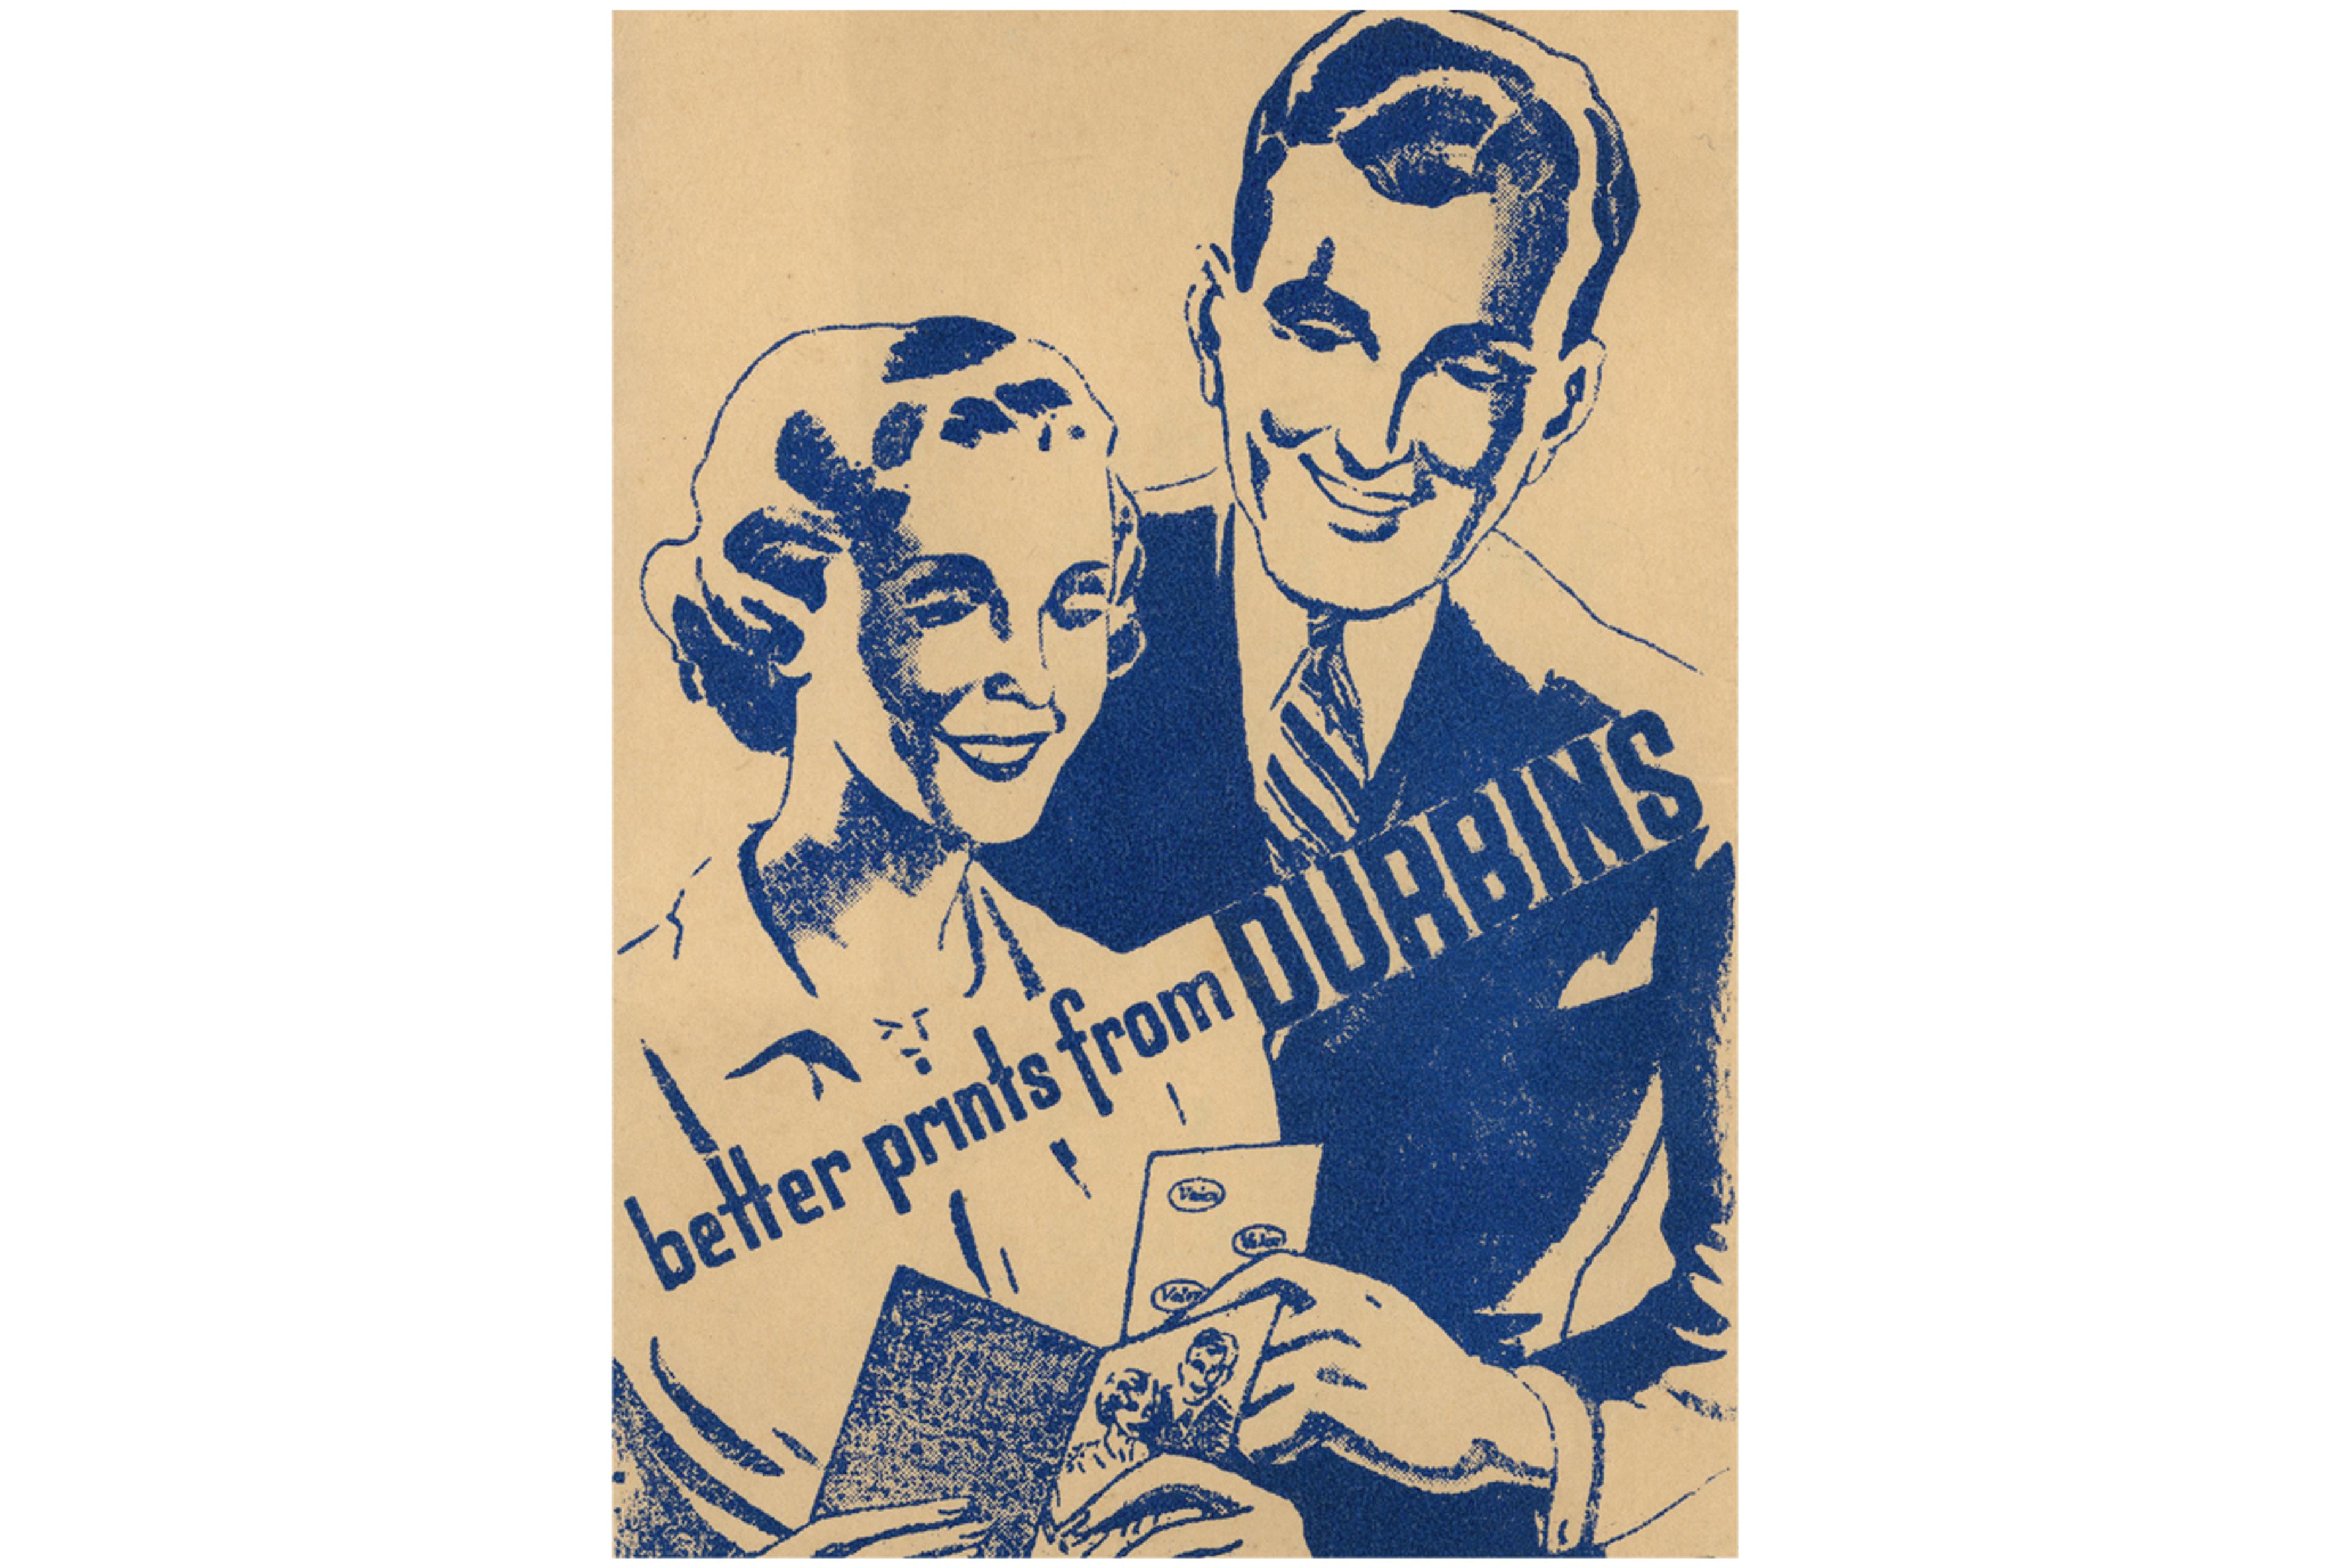 Photo of an envelope with the illustration of two people, both smiling, looking at the envelope of themselves and photographs with the text 'better prints from Durbins'.